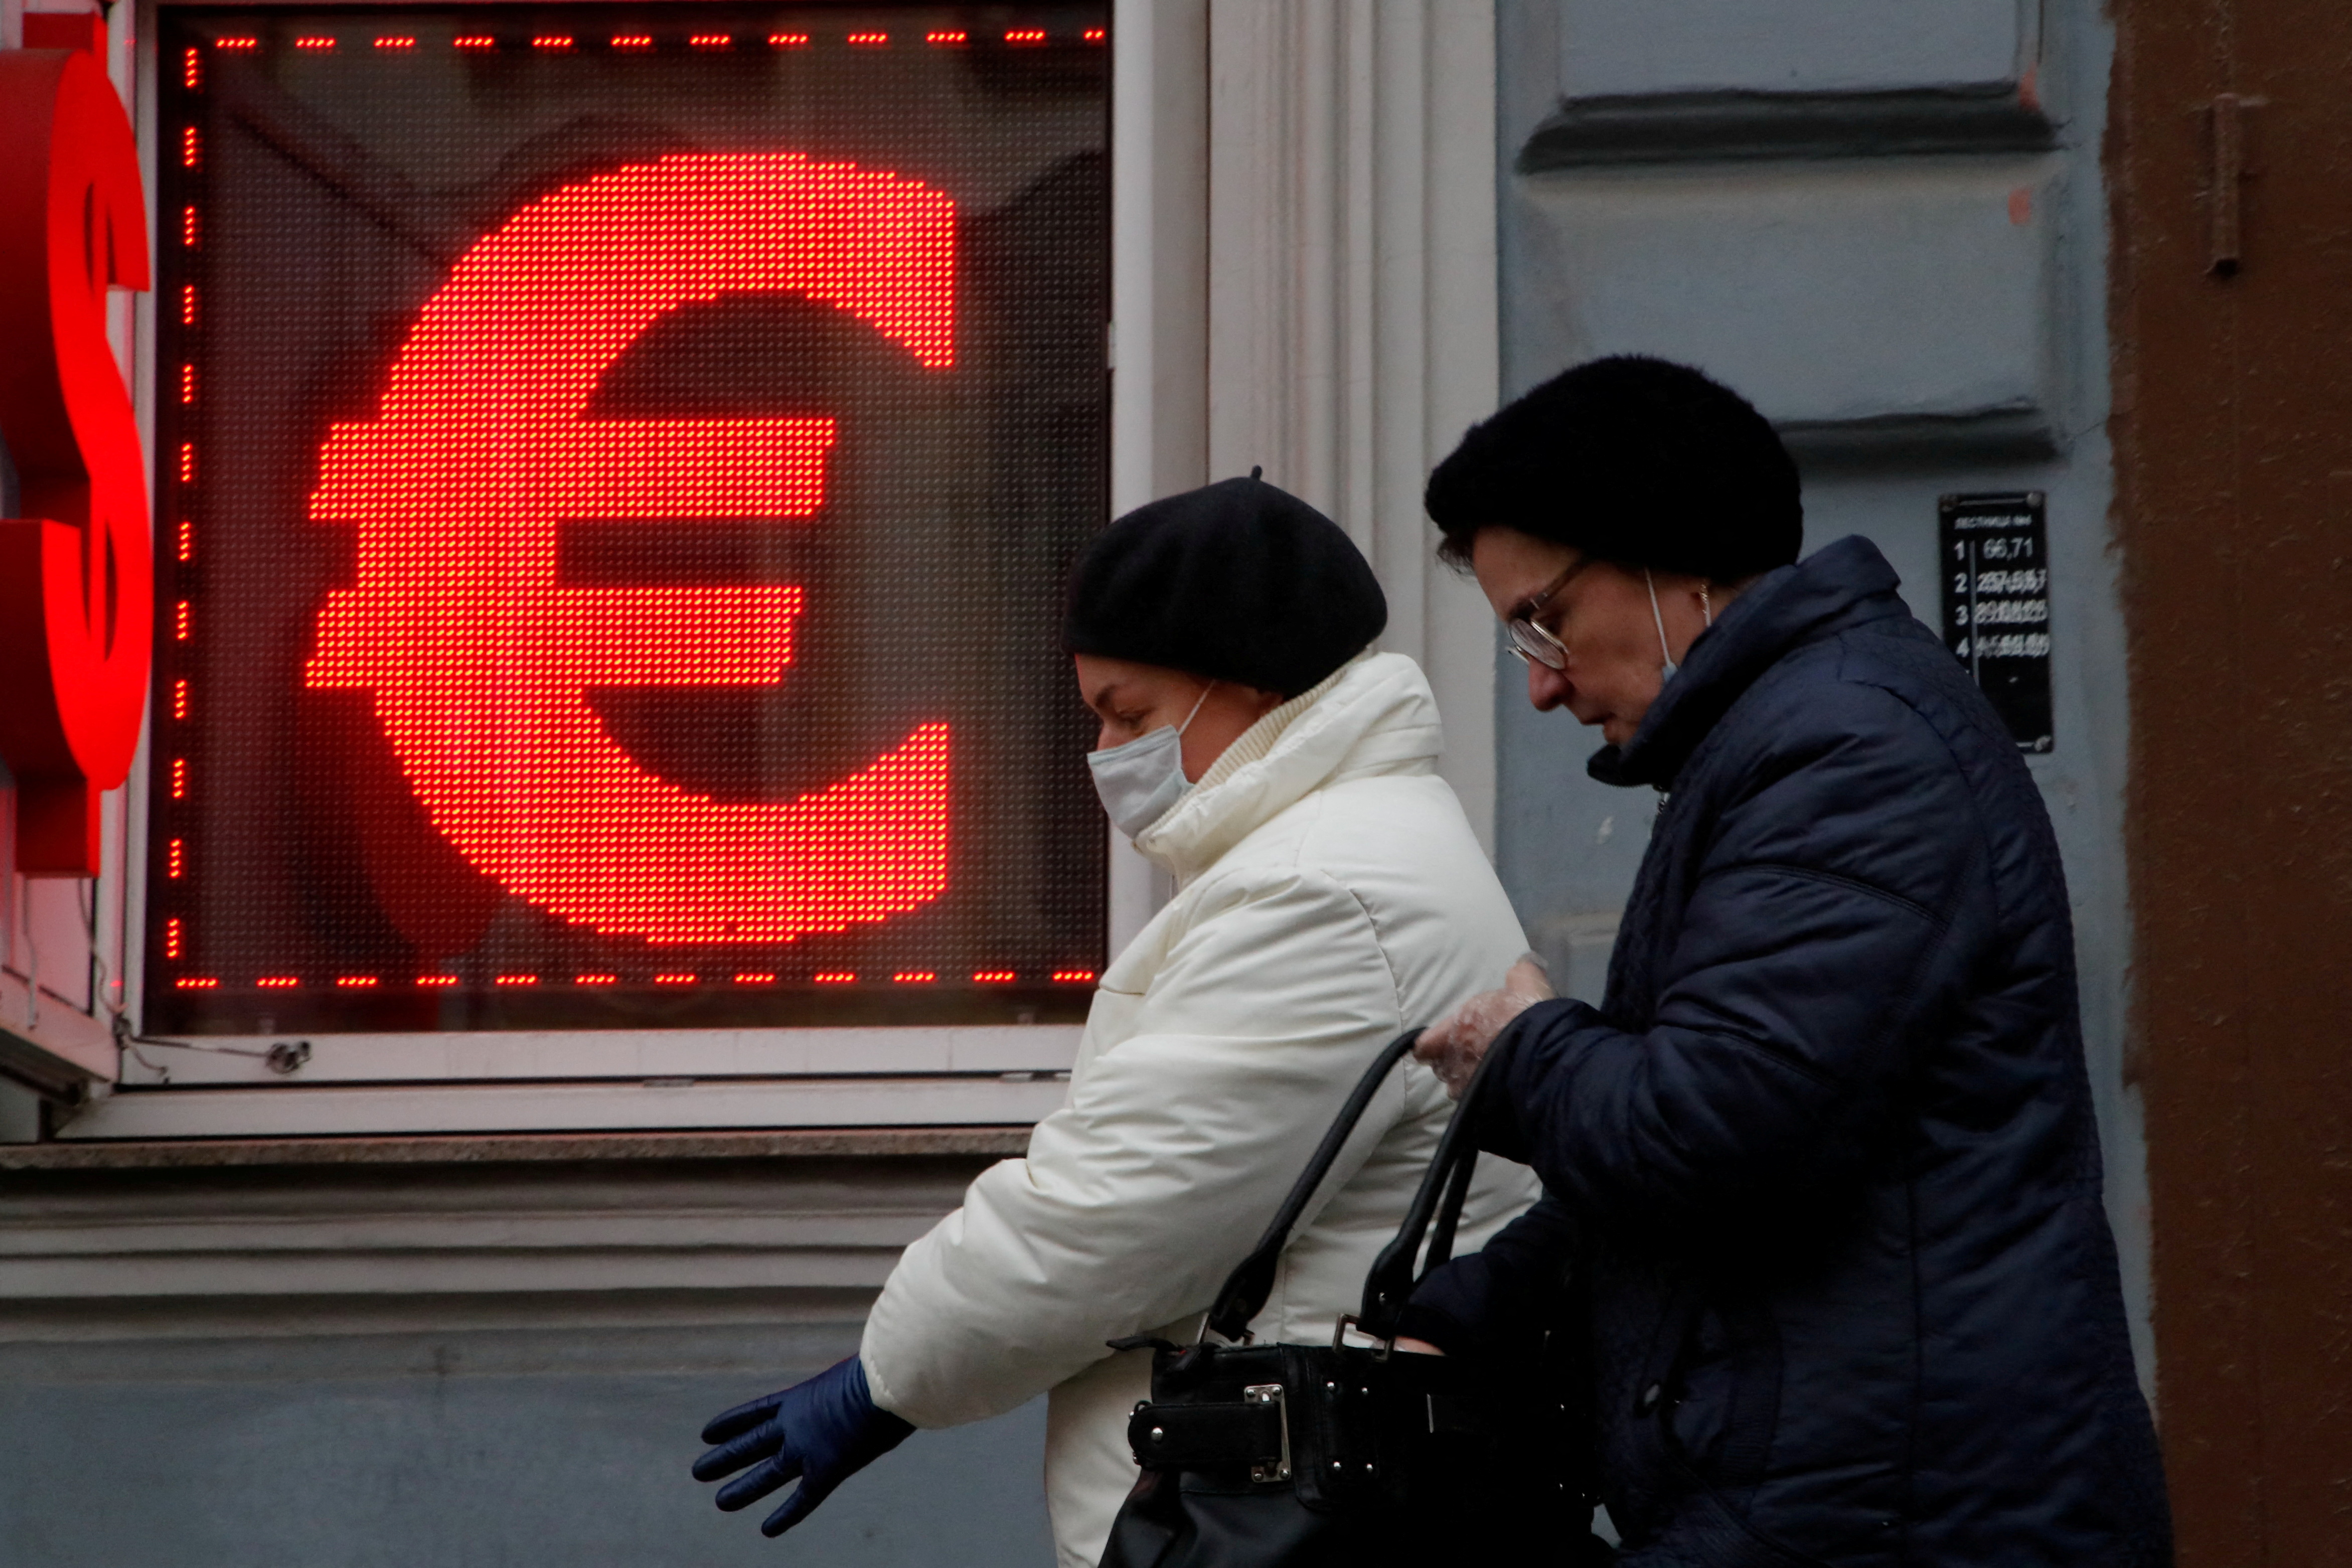 Women walk past a board showing the U.S. dollar and euro signs in Saint Petersburg